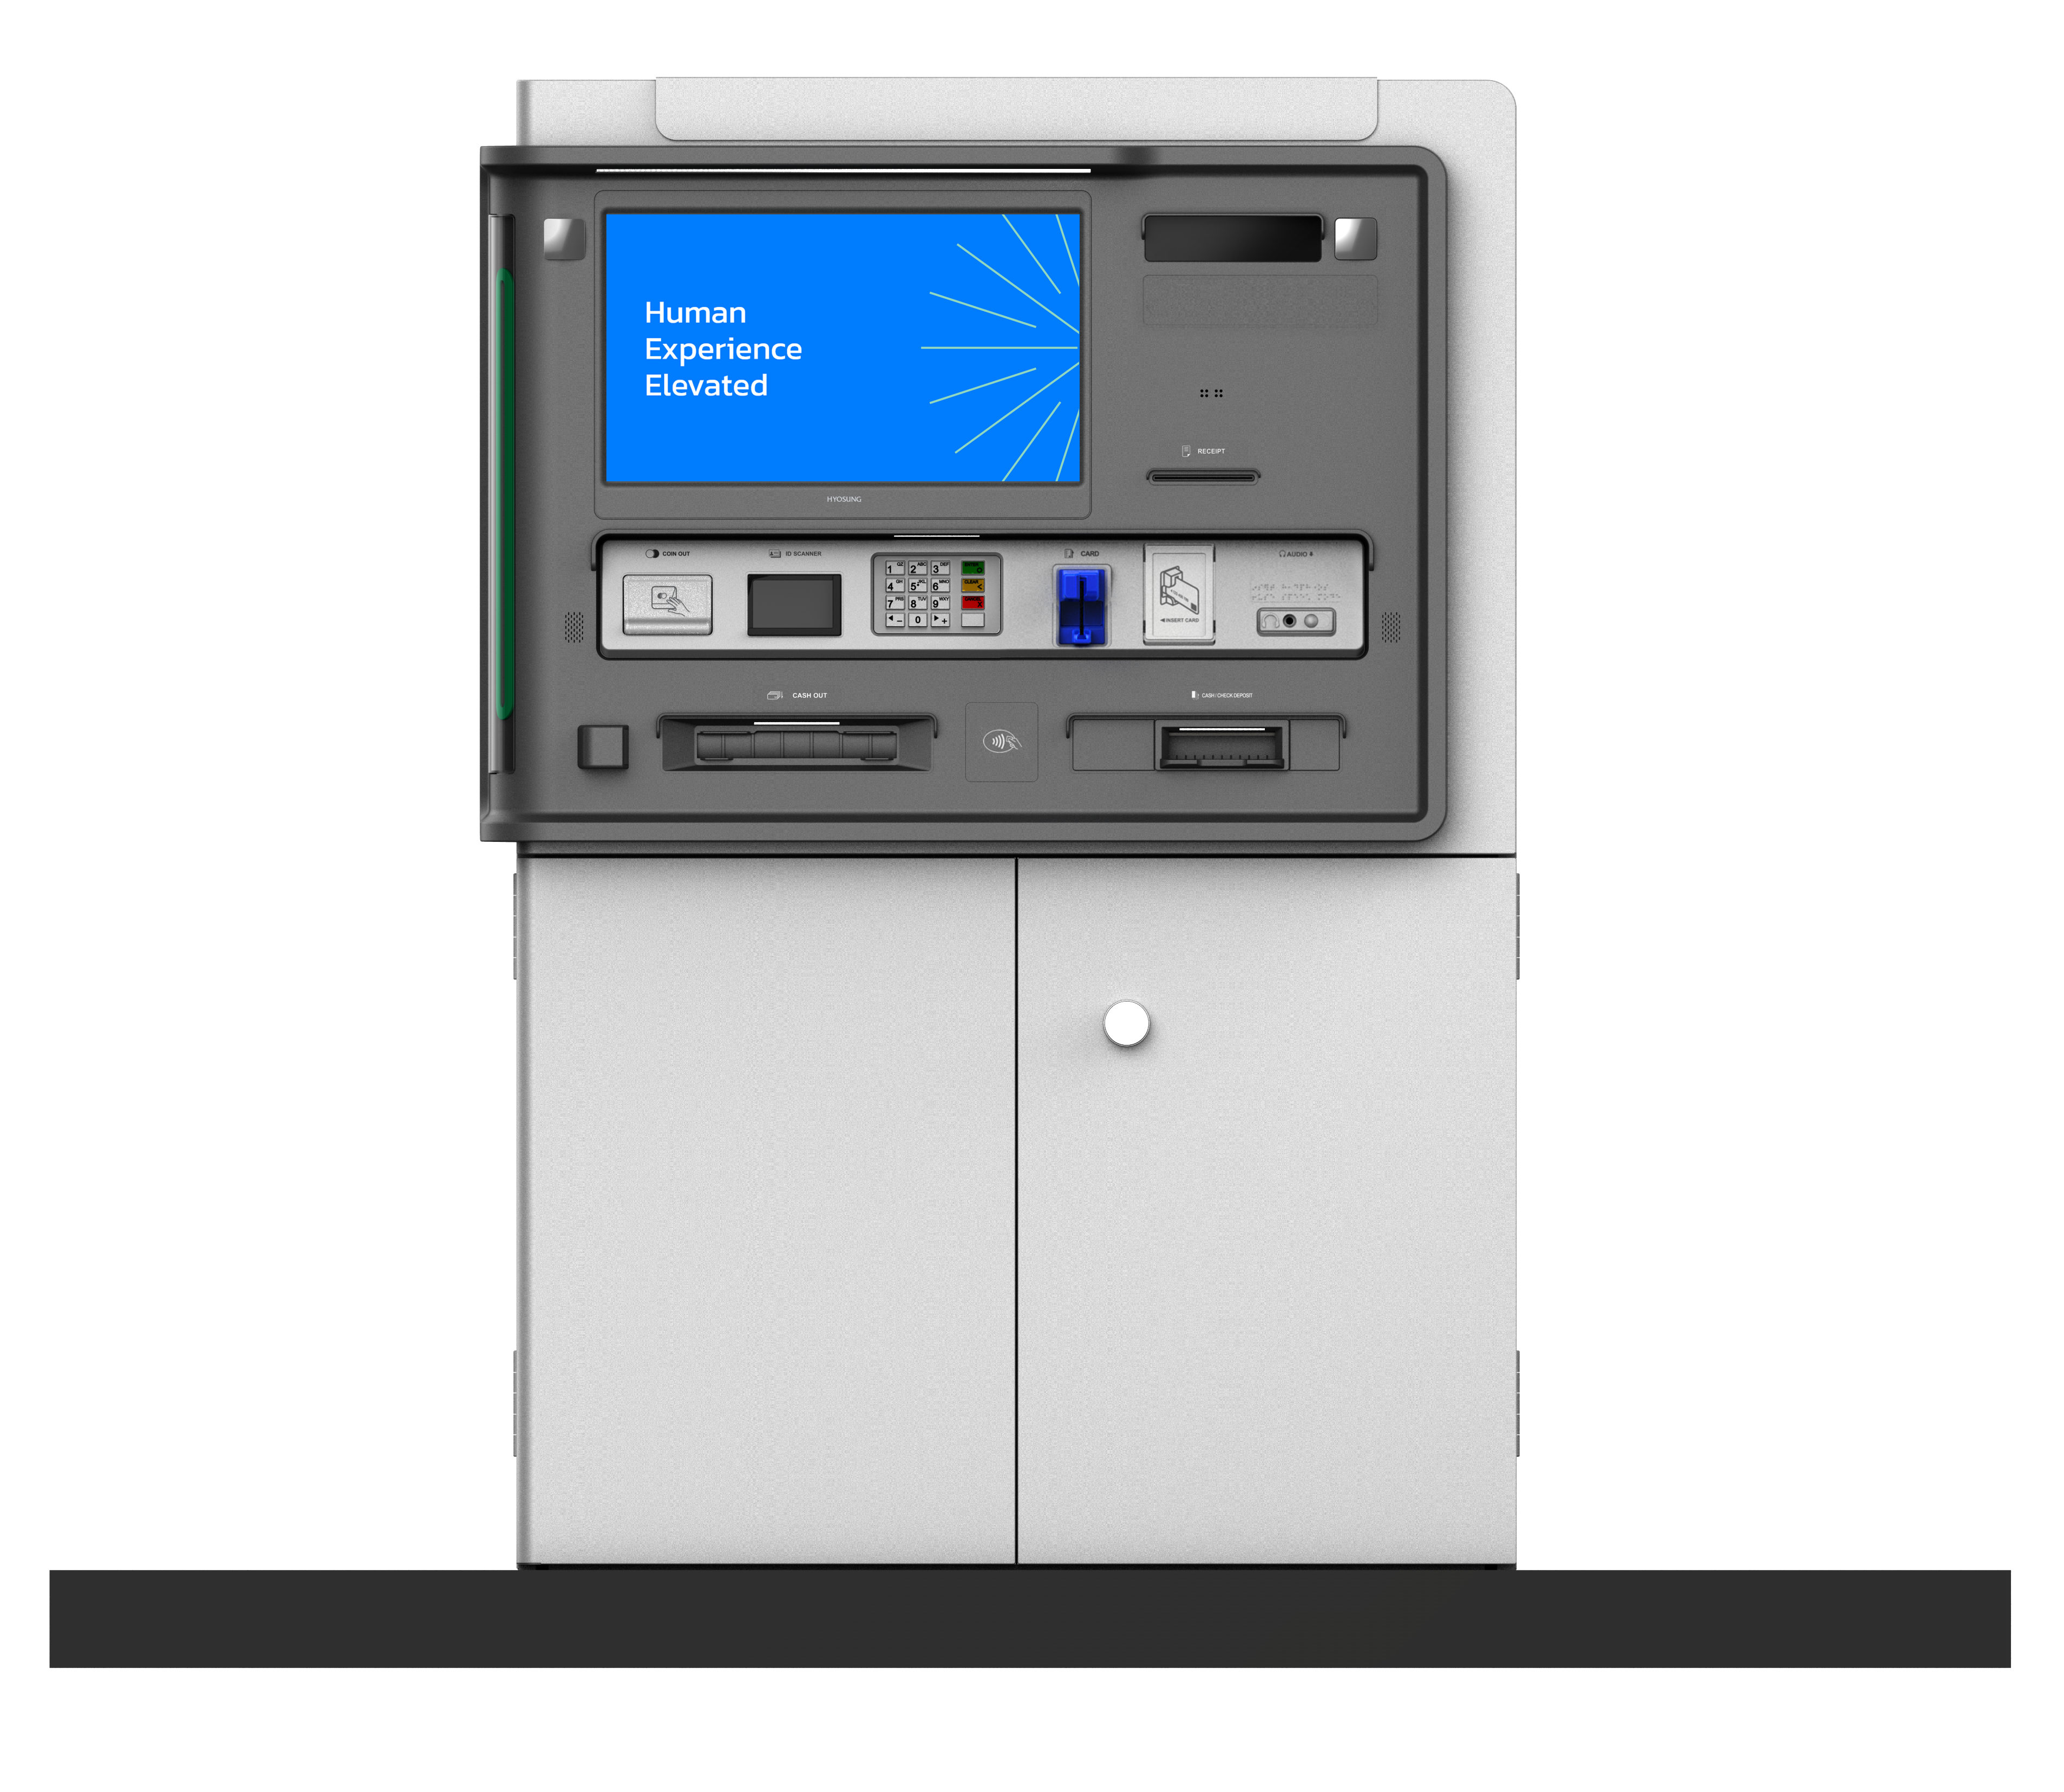 Image of Hyosung MX7800I, Multi-Function, Free-Standing, Island Drive-Up ATM